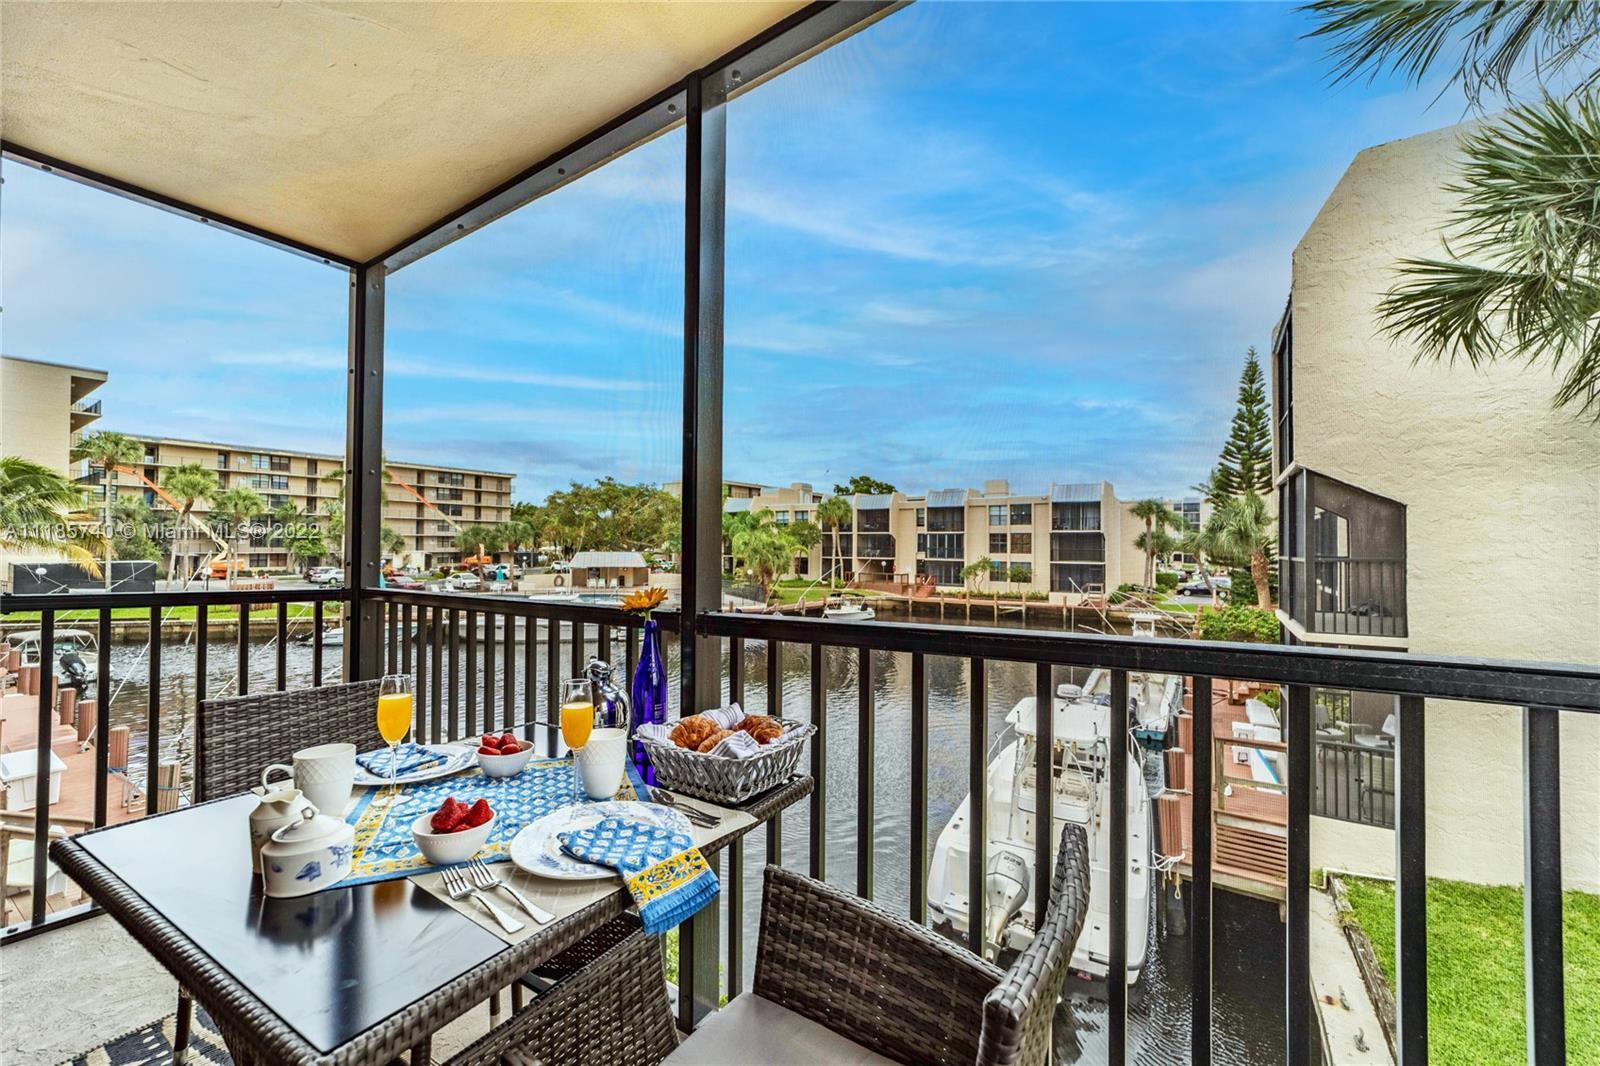 PERFECTLY LOCATED RESORT STYLE SETTING W 5 POOLS,TENNIS COURTS 4-7 MINUTES TO MIZNER PARK, MARKETS, 